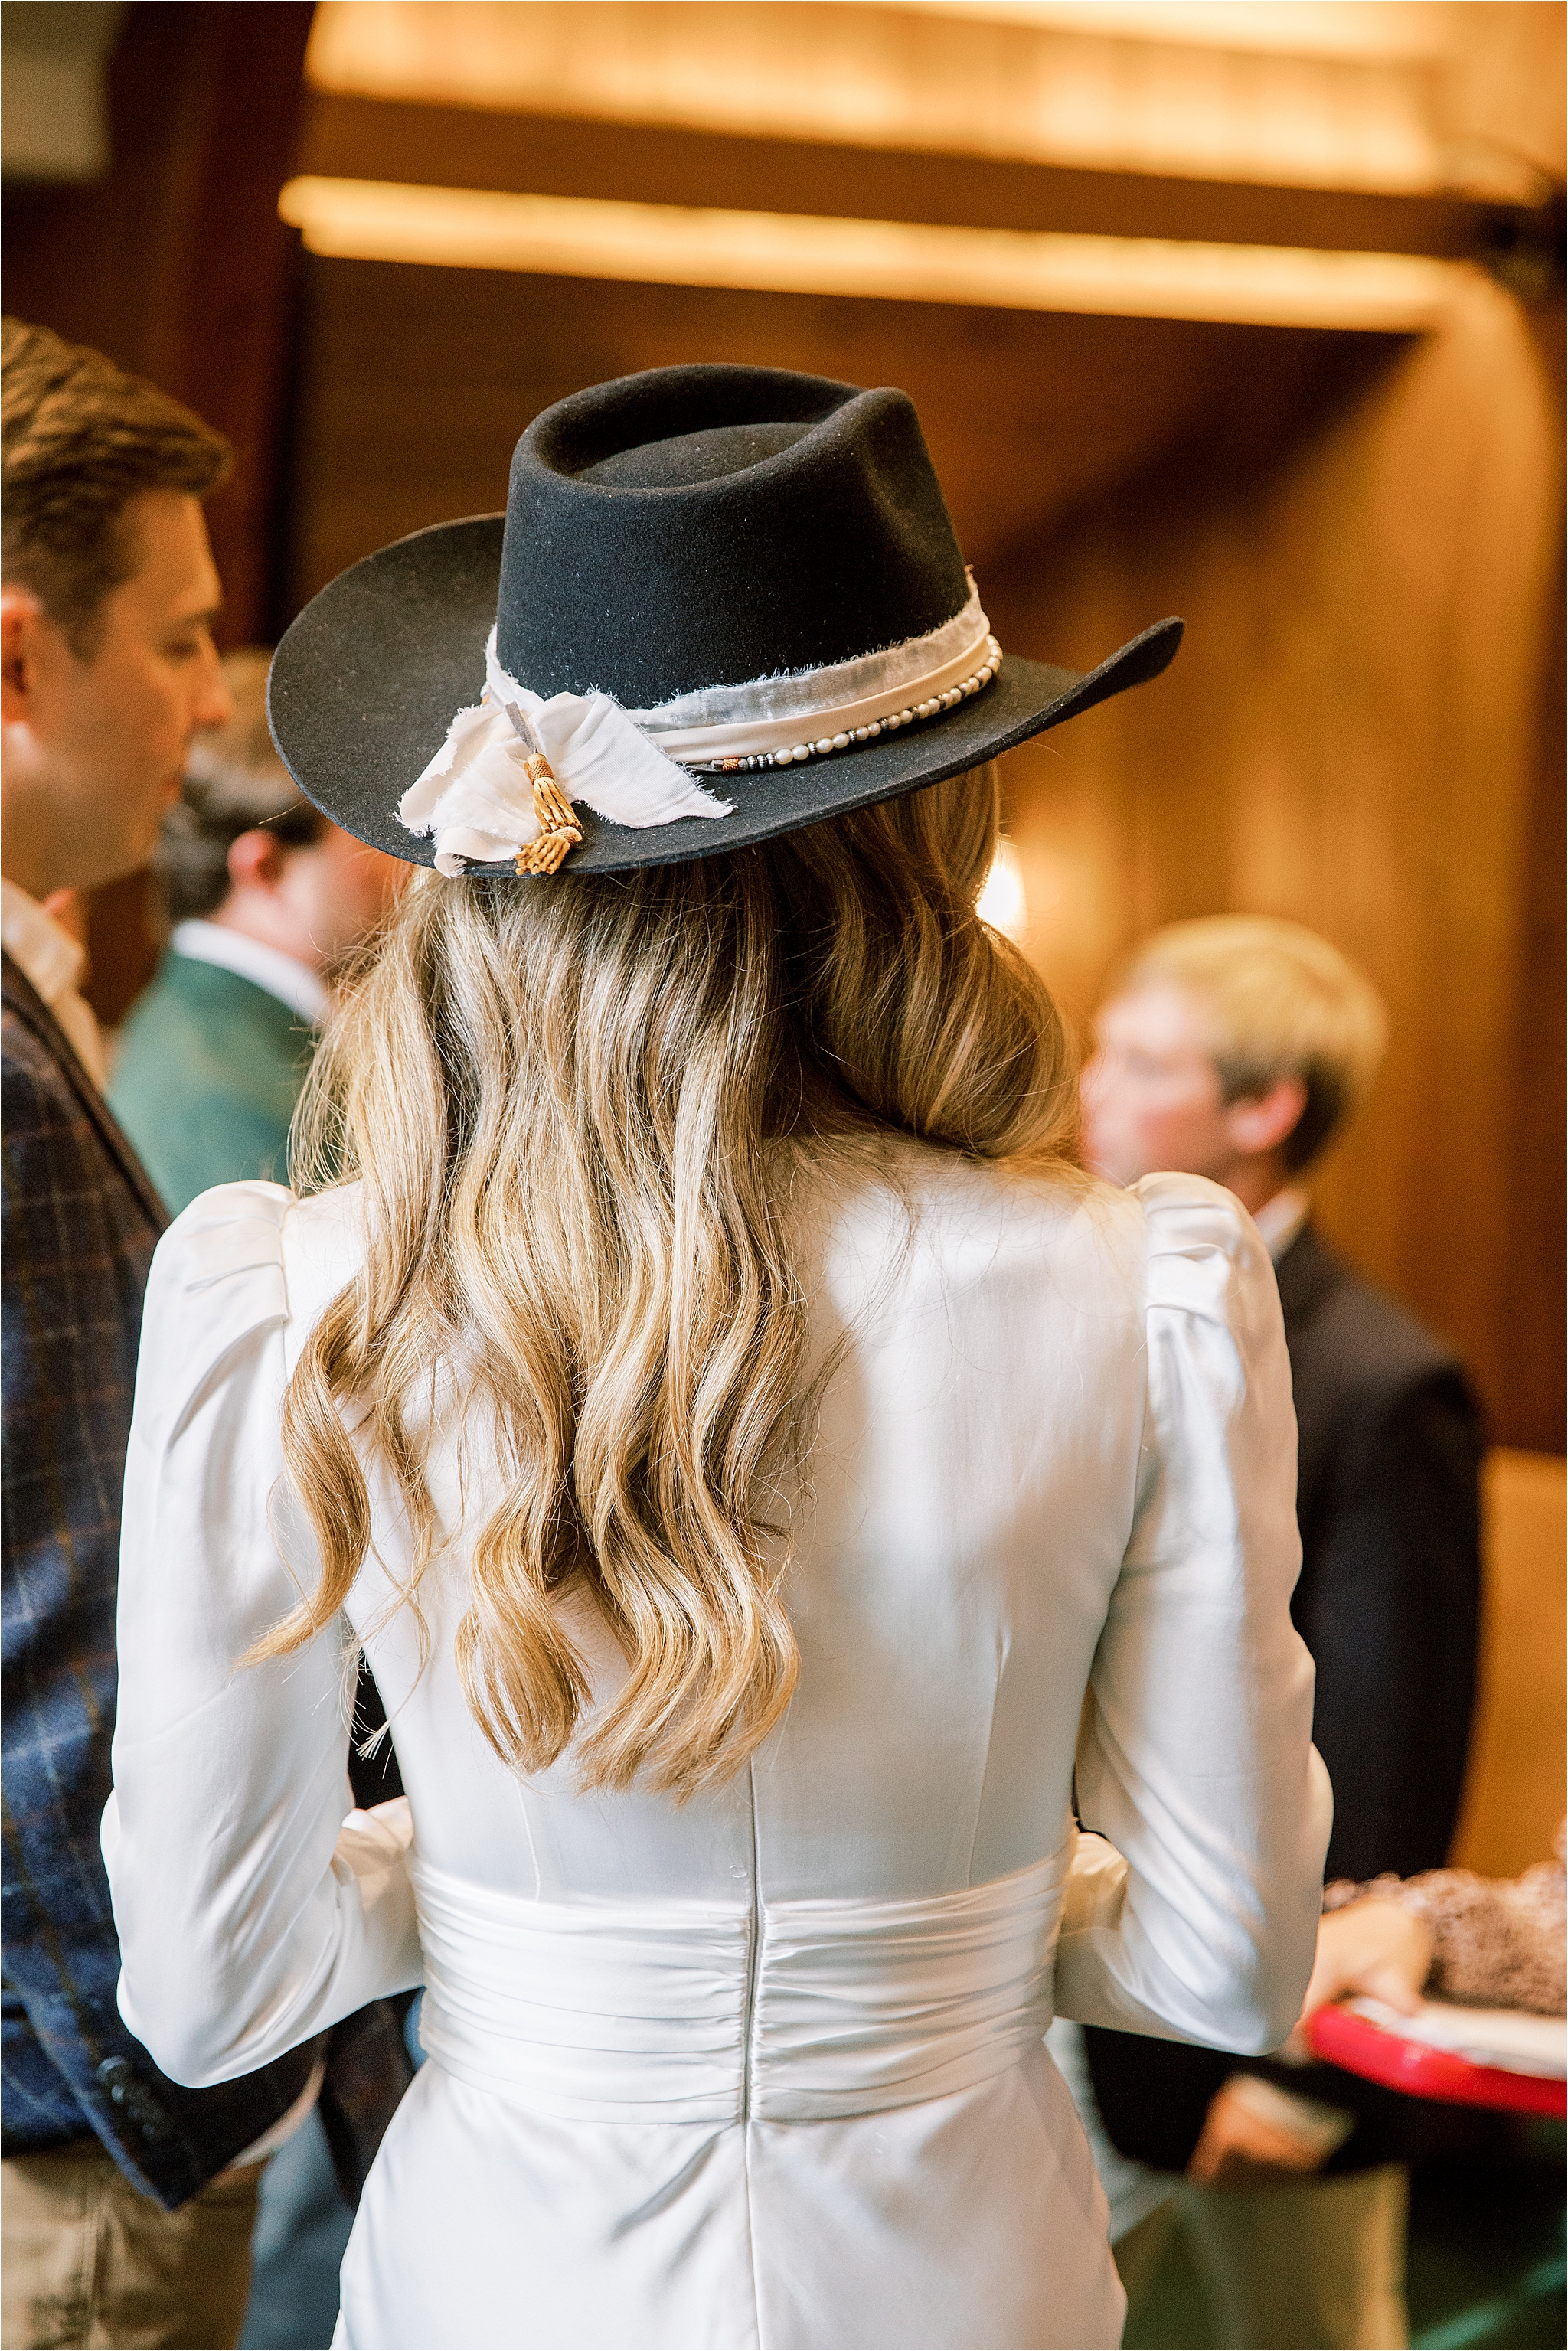 Vail Wedding, Four Seasons Vail Wedding, Charleston Couple, The Slope Room, Gravity Haus, Vail Interfaith Chapel, Kemosabe Wedding, Kemosabe Hats on Bridal Party, Western Chic Themed Welcome Party, Colorado Western Chic, Rehearsal dinner, Western wedding, chic bride